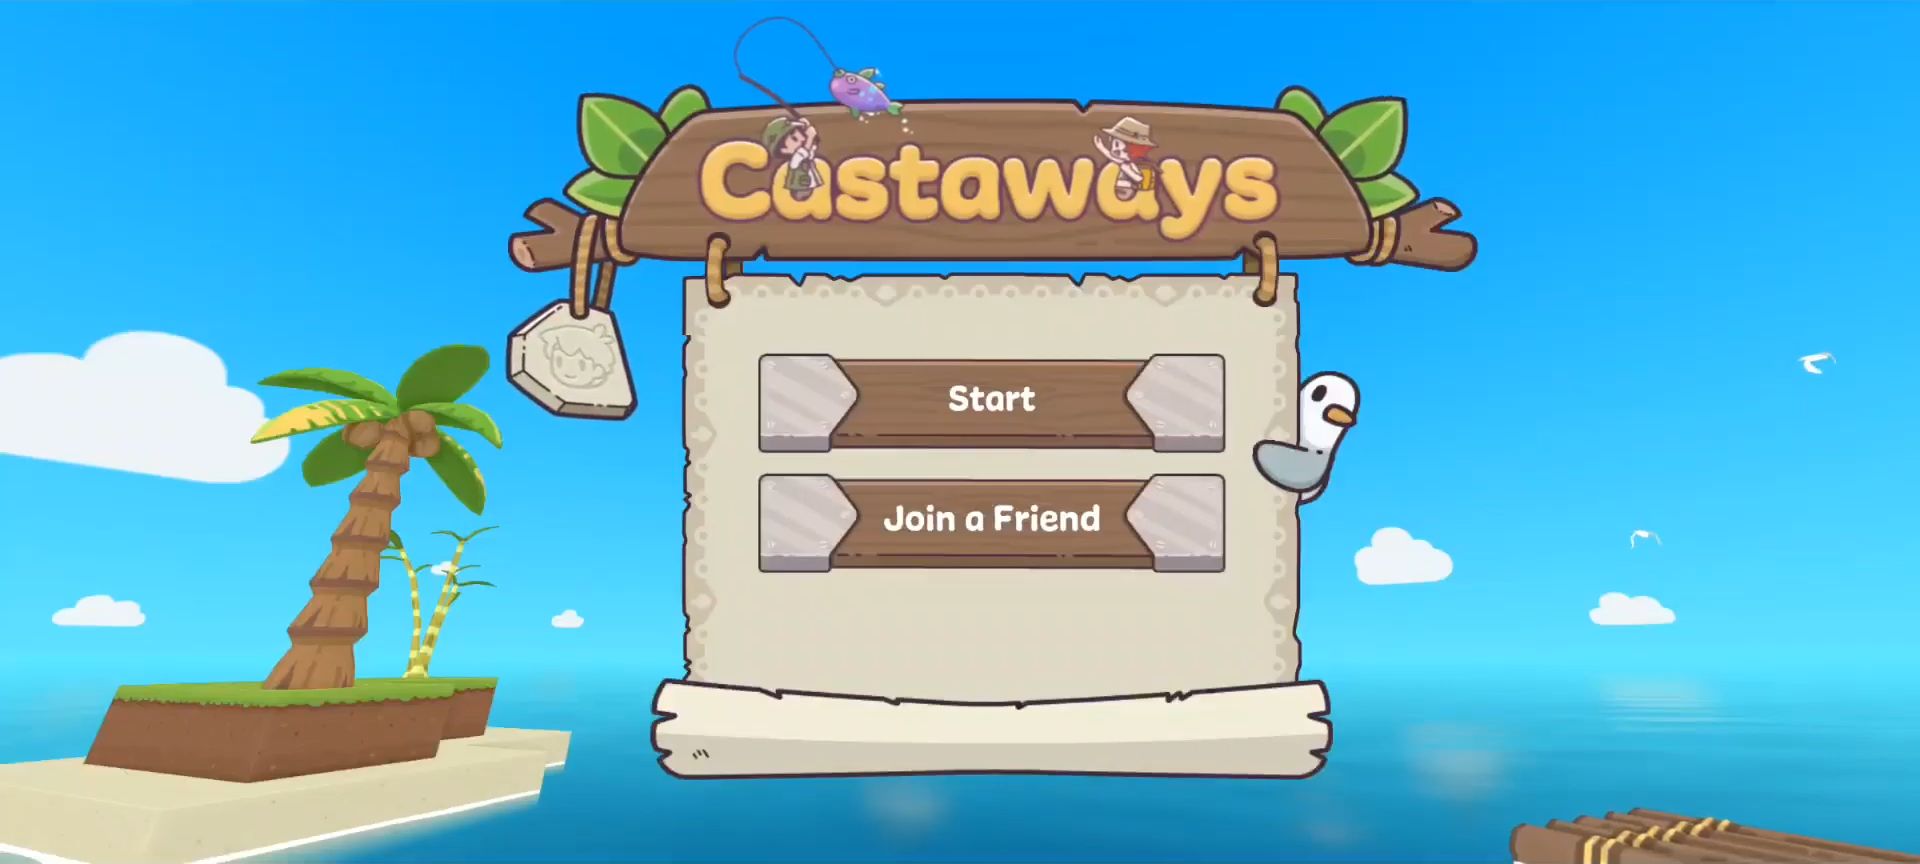 Download Castaways Android free game.